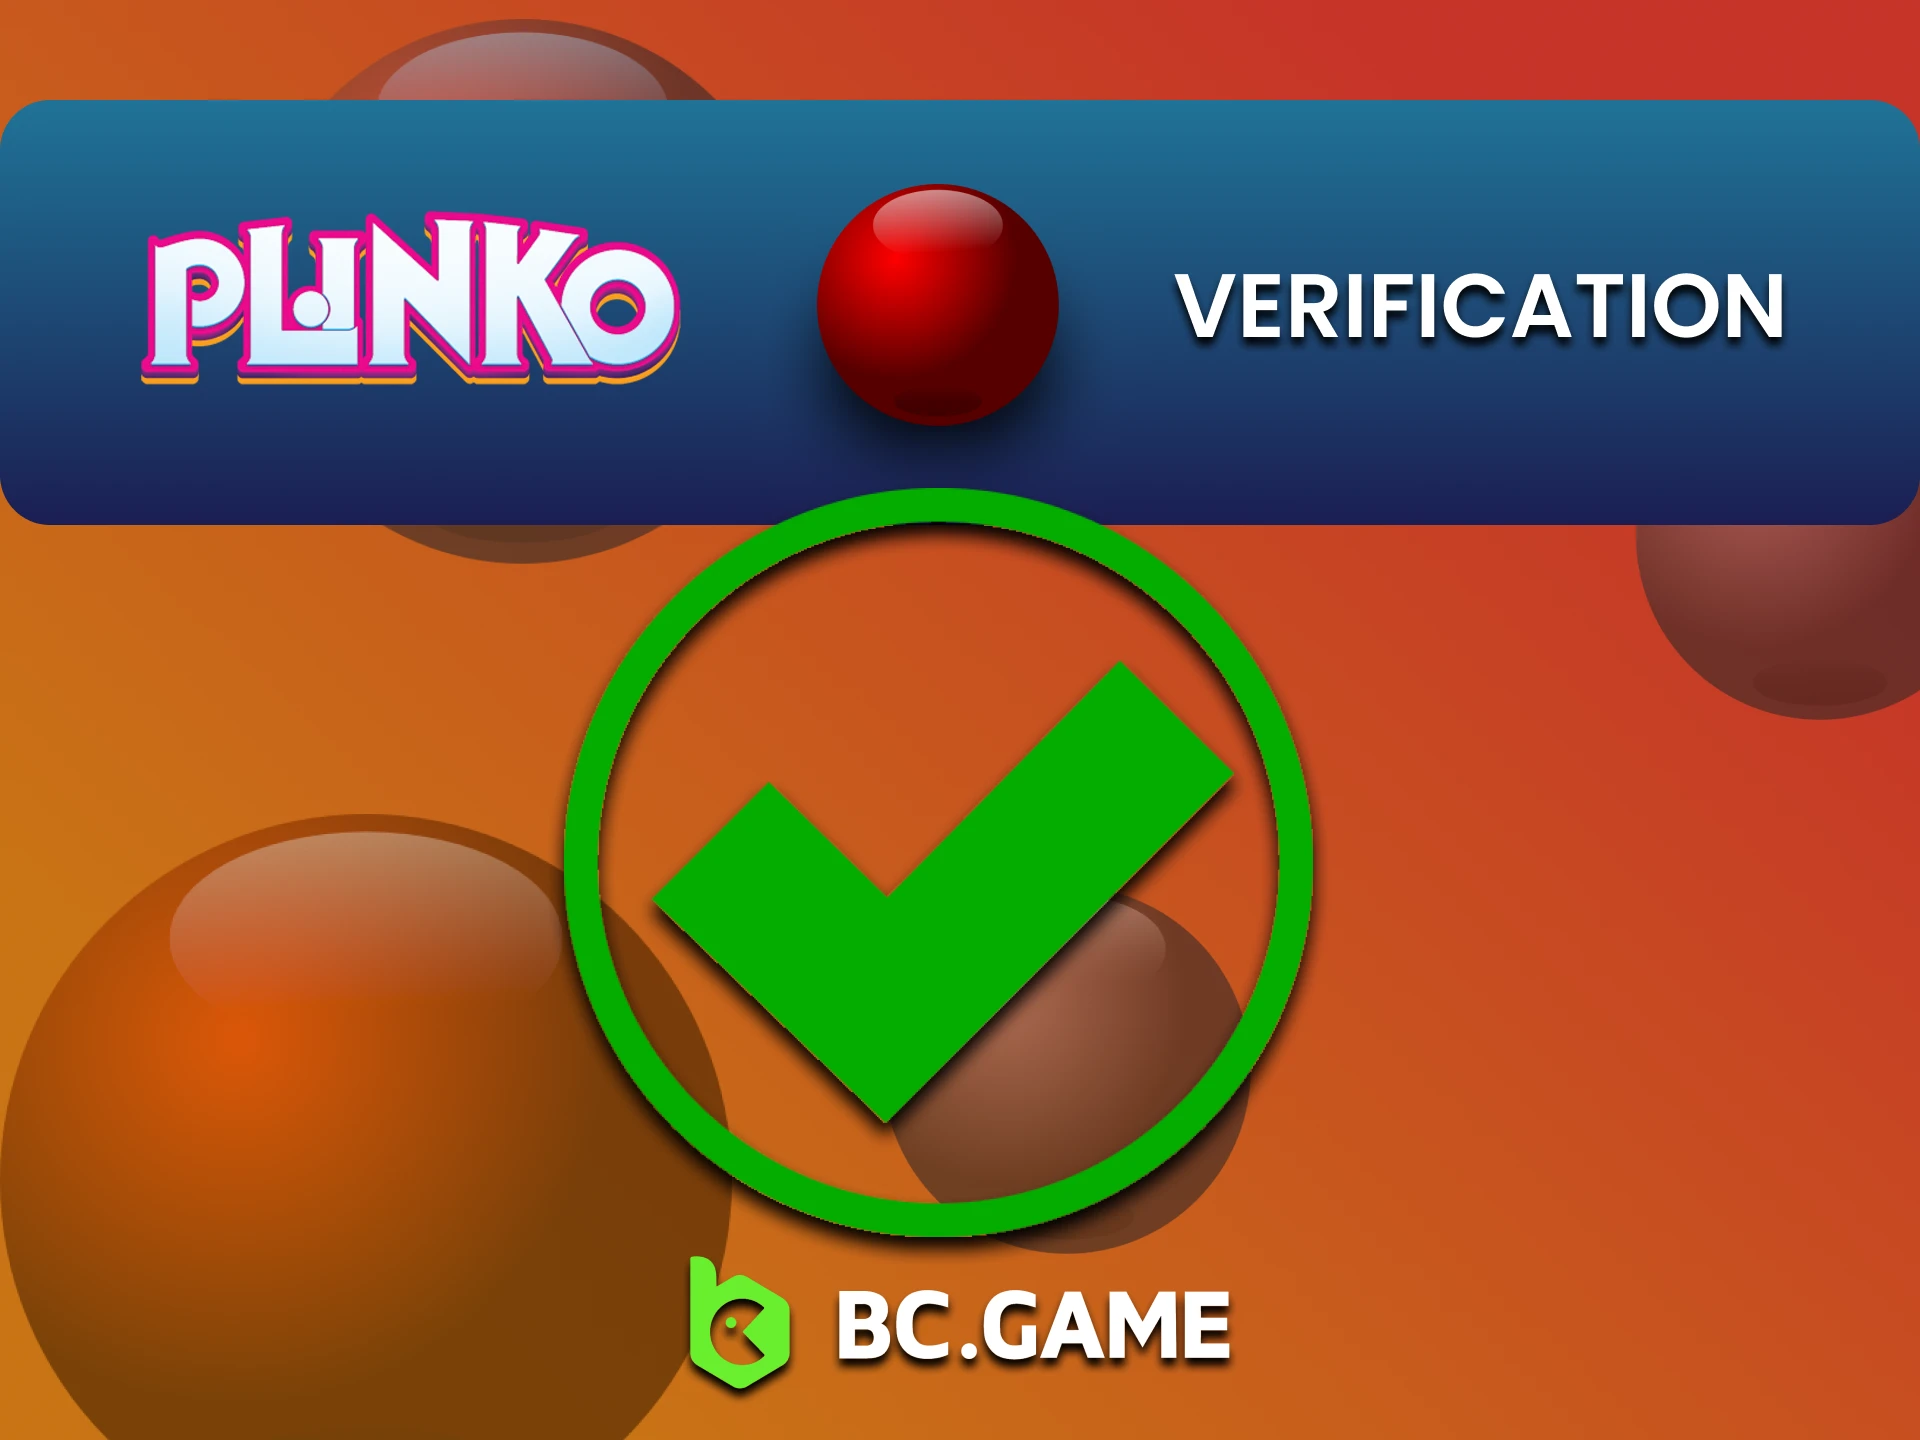 Fill out all the information on the BCGame website to play Plinko.